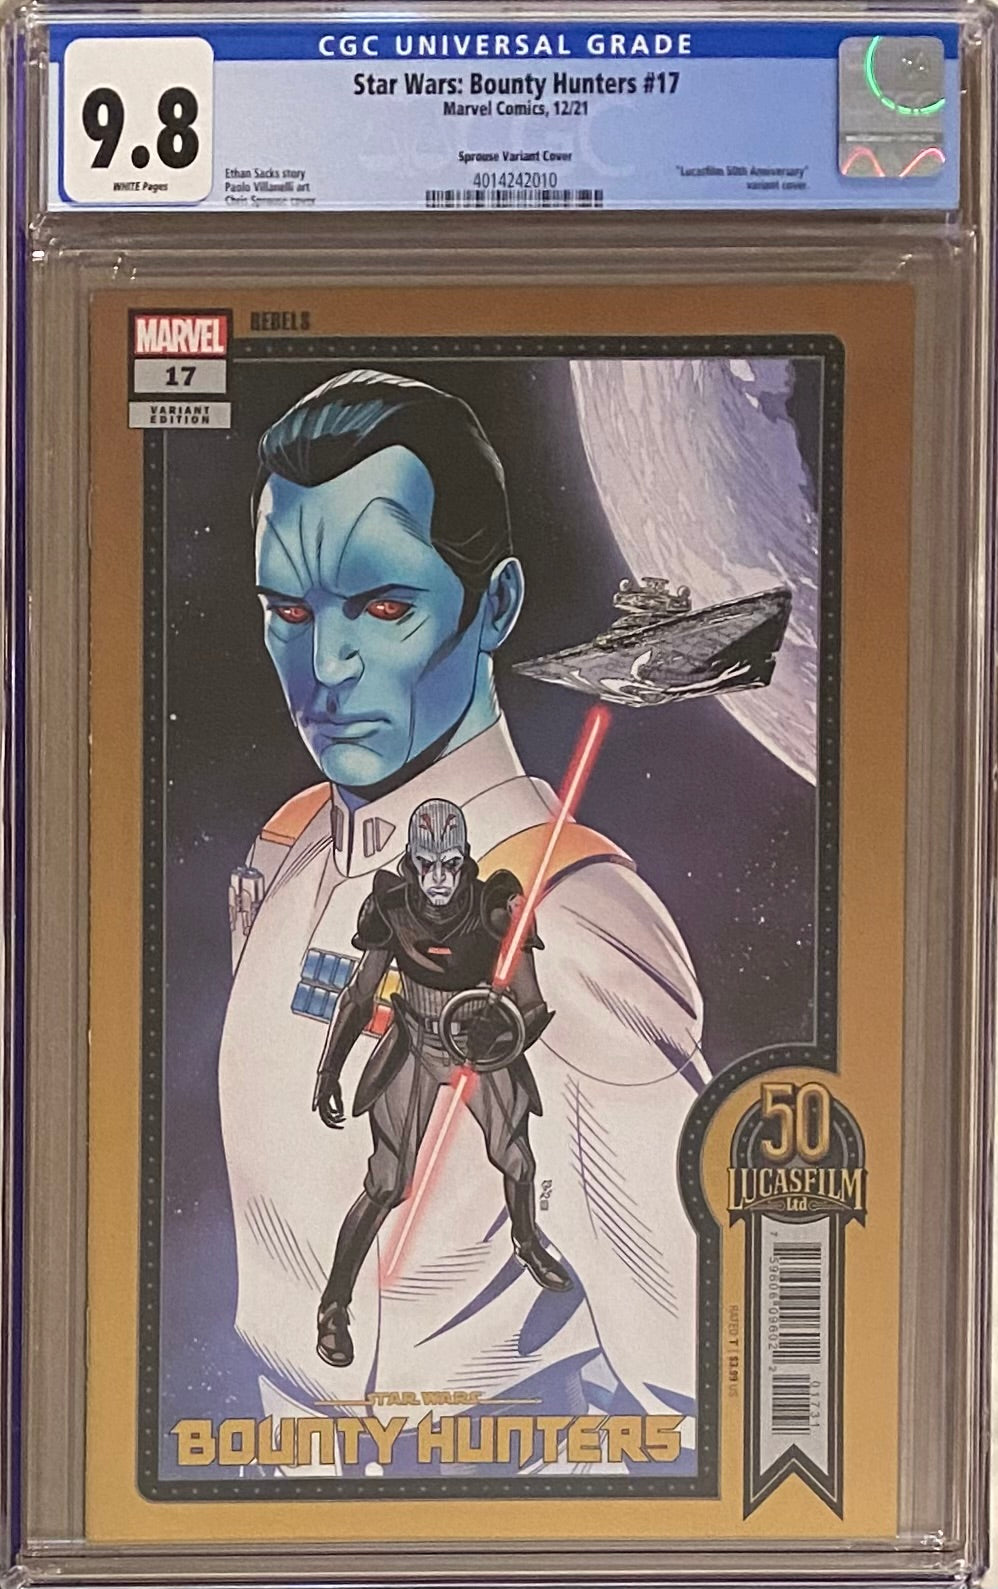 Star Wars: Bounty Hunters #17 Sprouse Variant CGC 9.8 - War of the Bounty Hunters